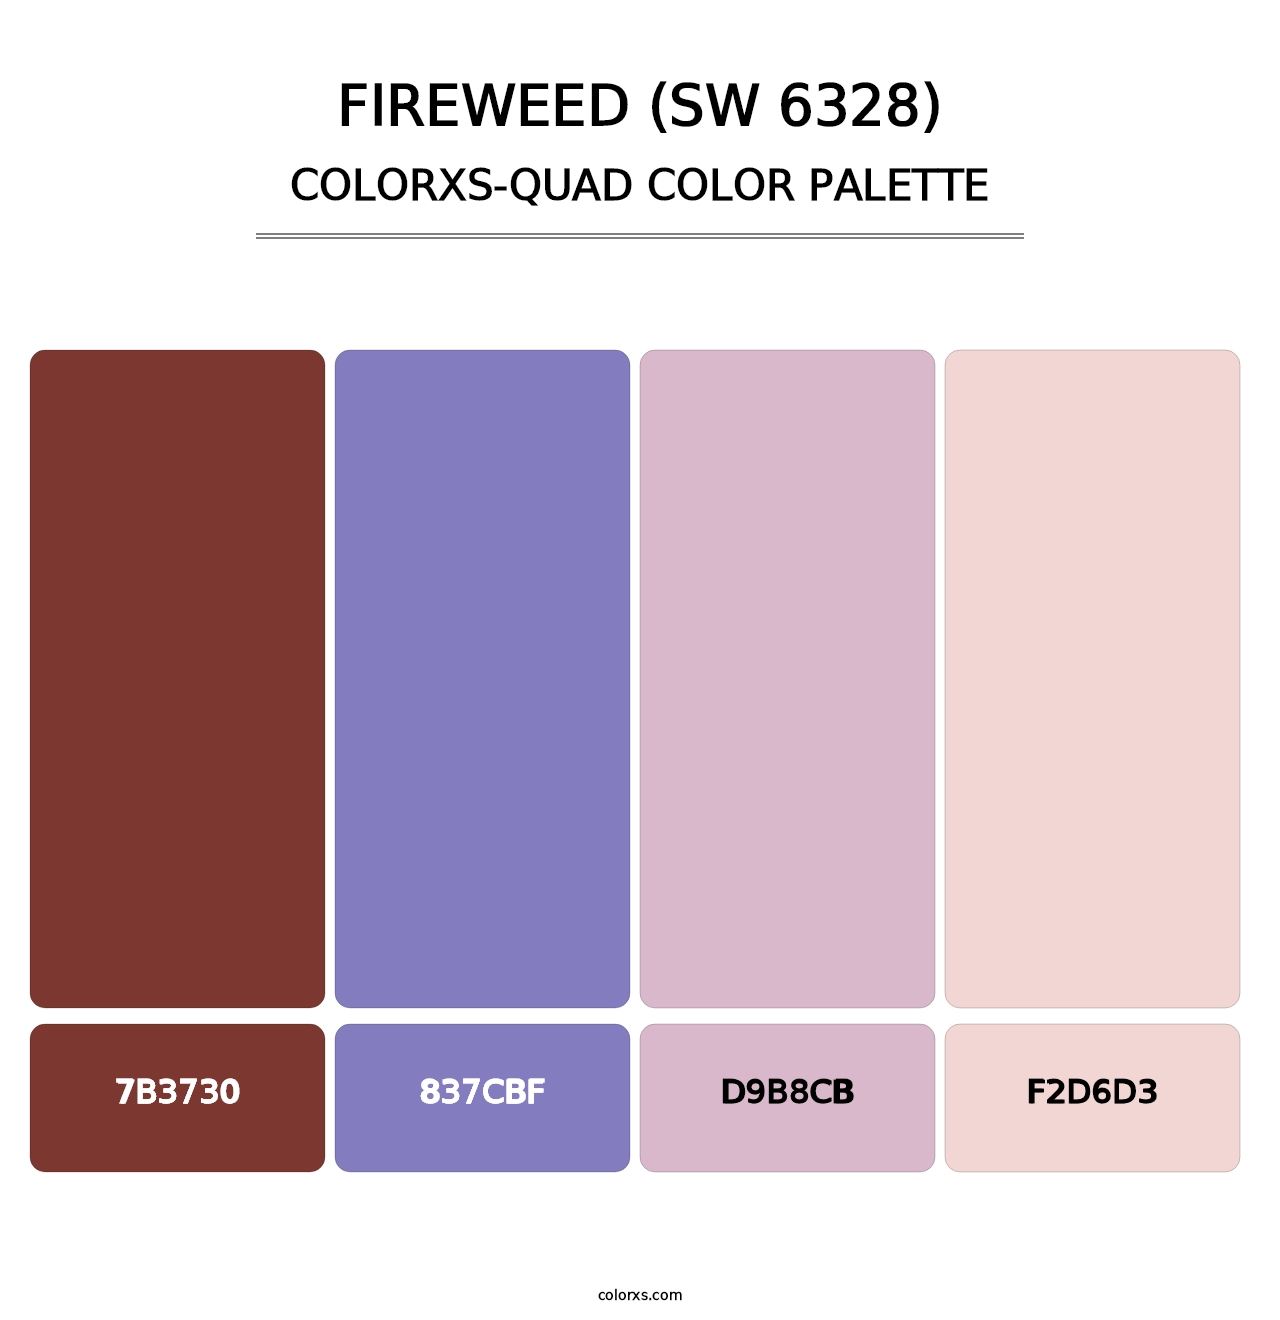 Fireweed (SW 6328) - Colorxs Quad Palette